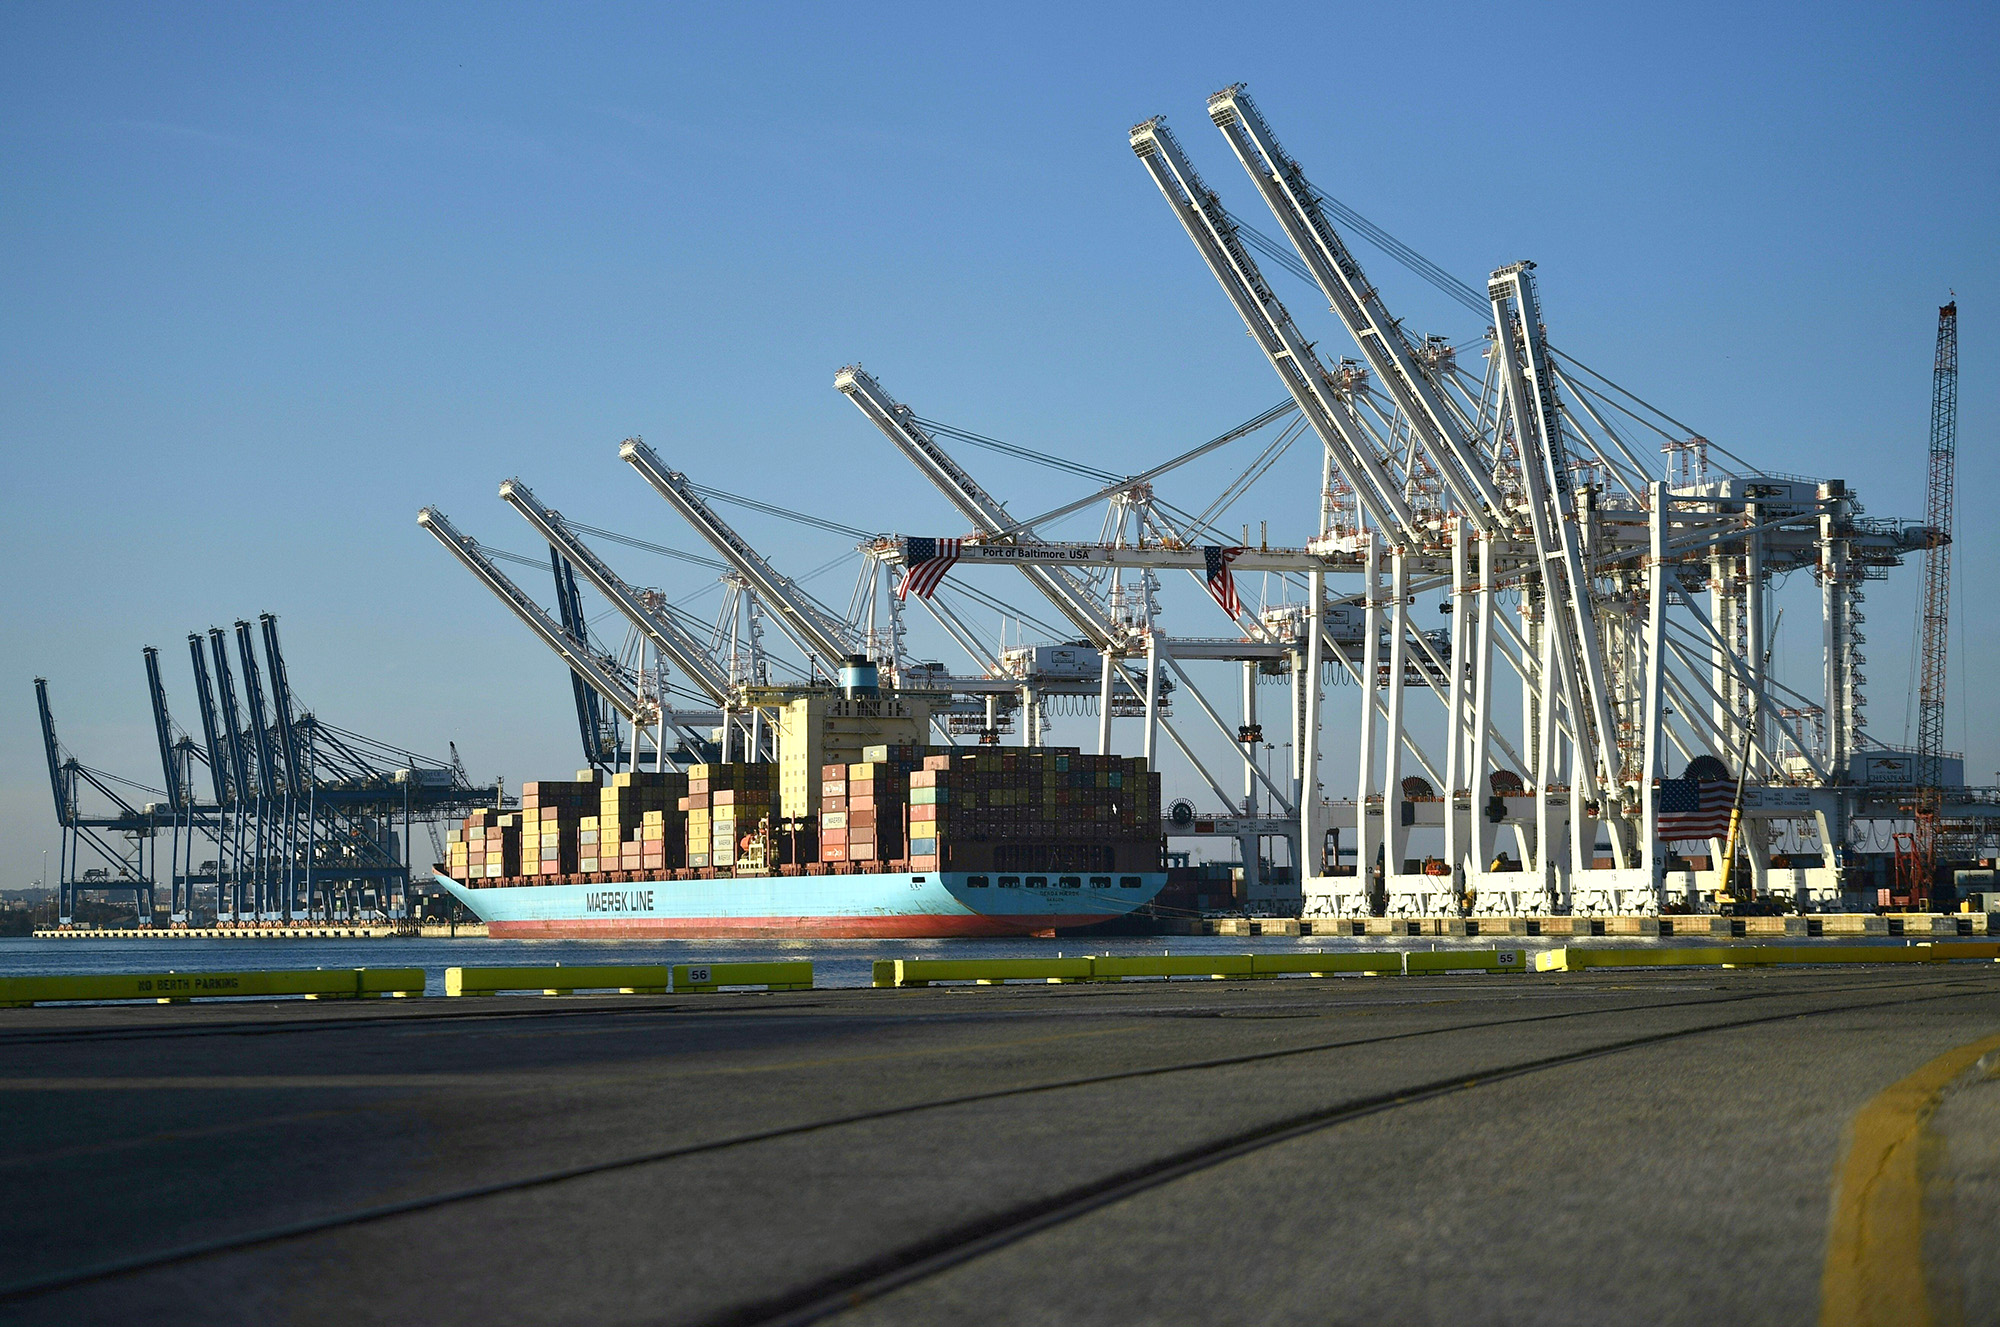 Cranes stack cargo containers at the Port of Baltimore in Baltimore, Maryland, on November 10, 2021